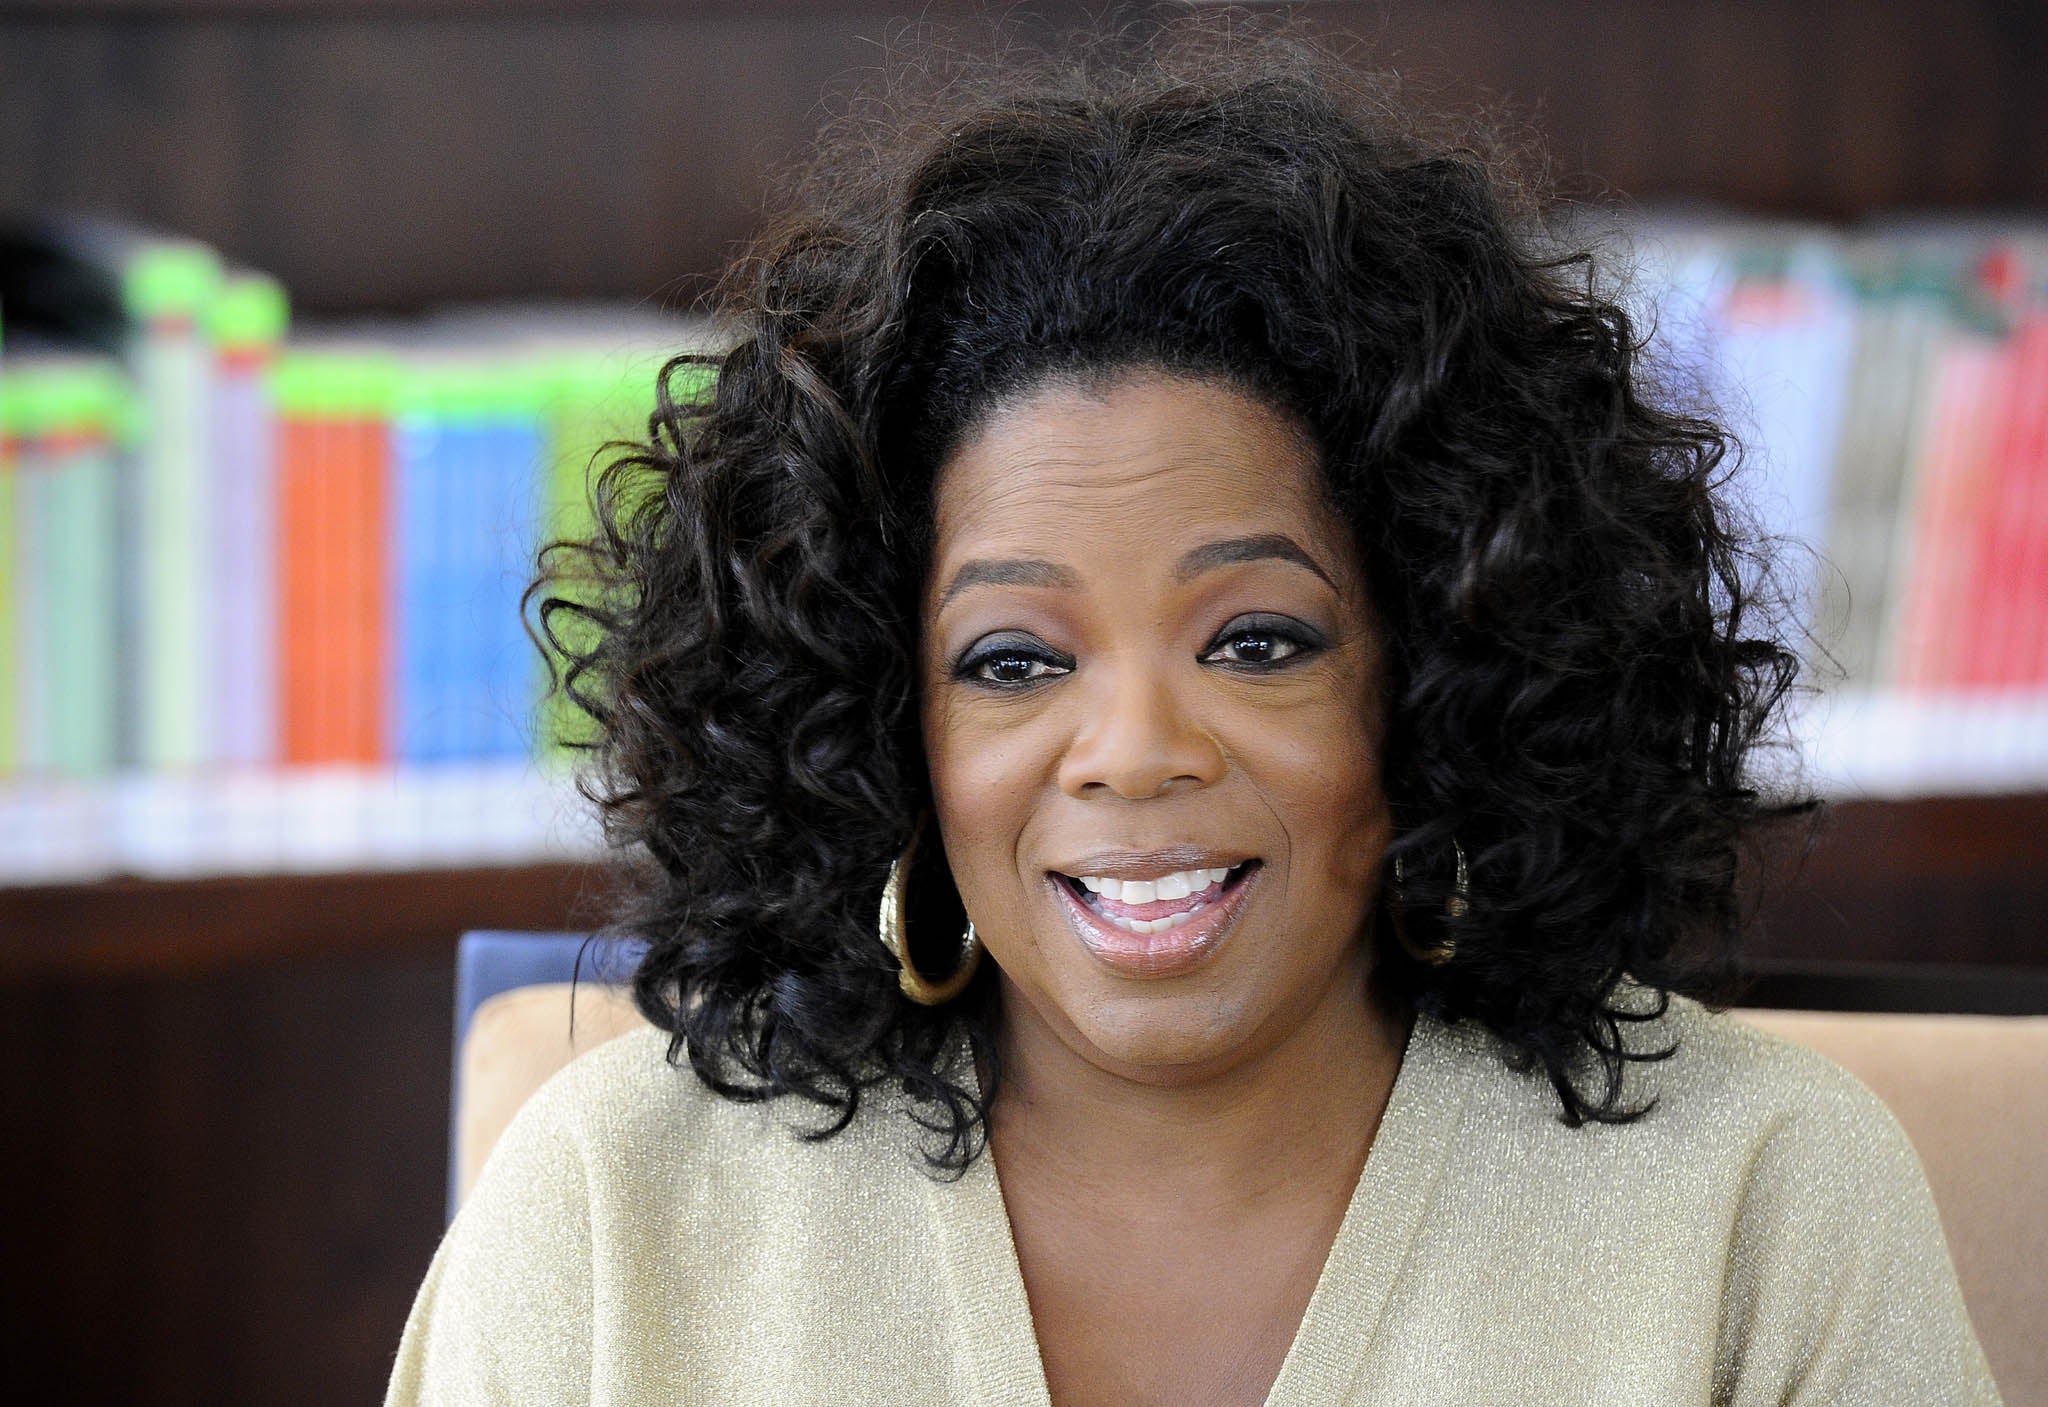 Oprah Winfrey says she was a victim of racism during a recent visit to Switzerland.